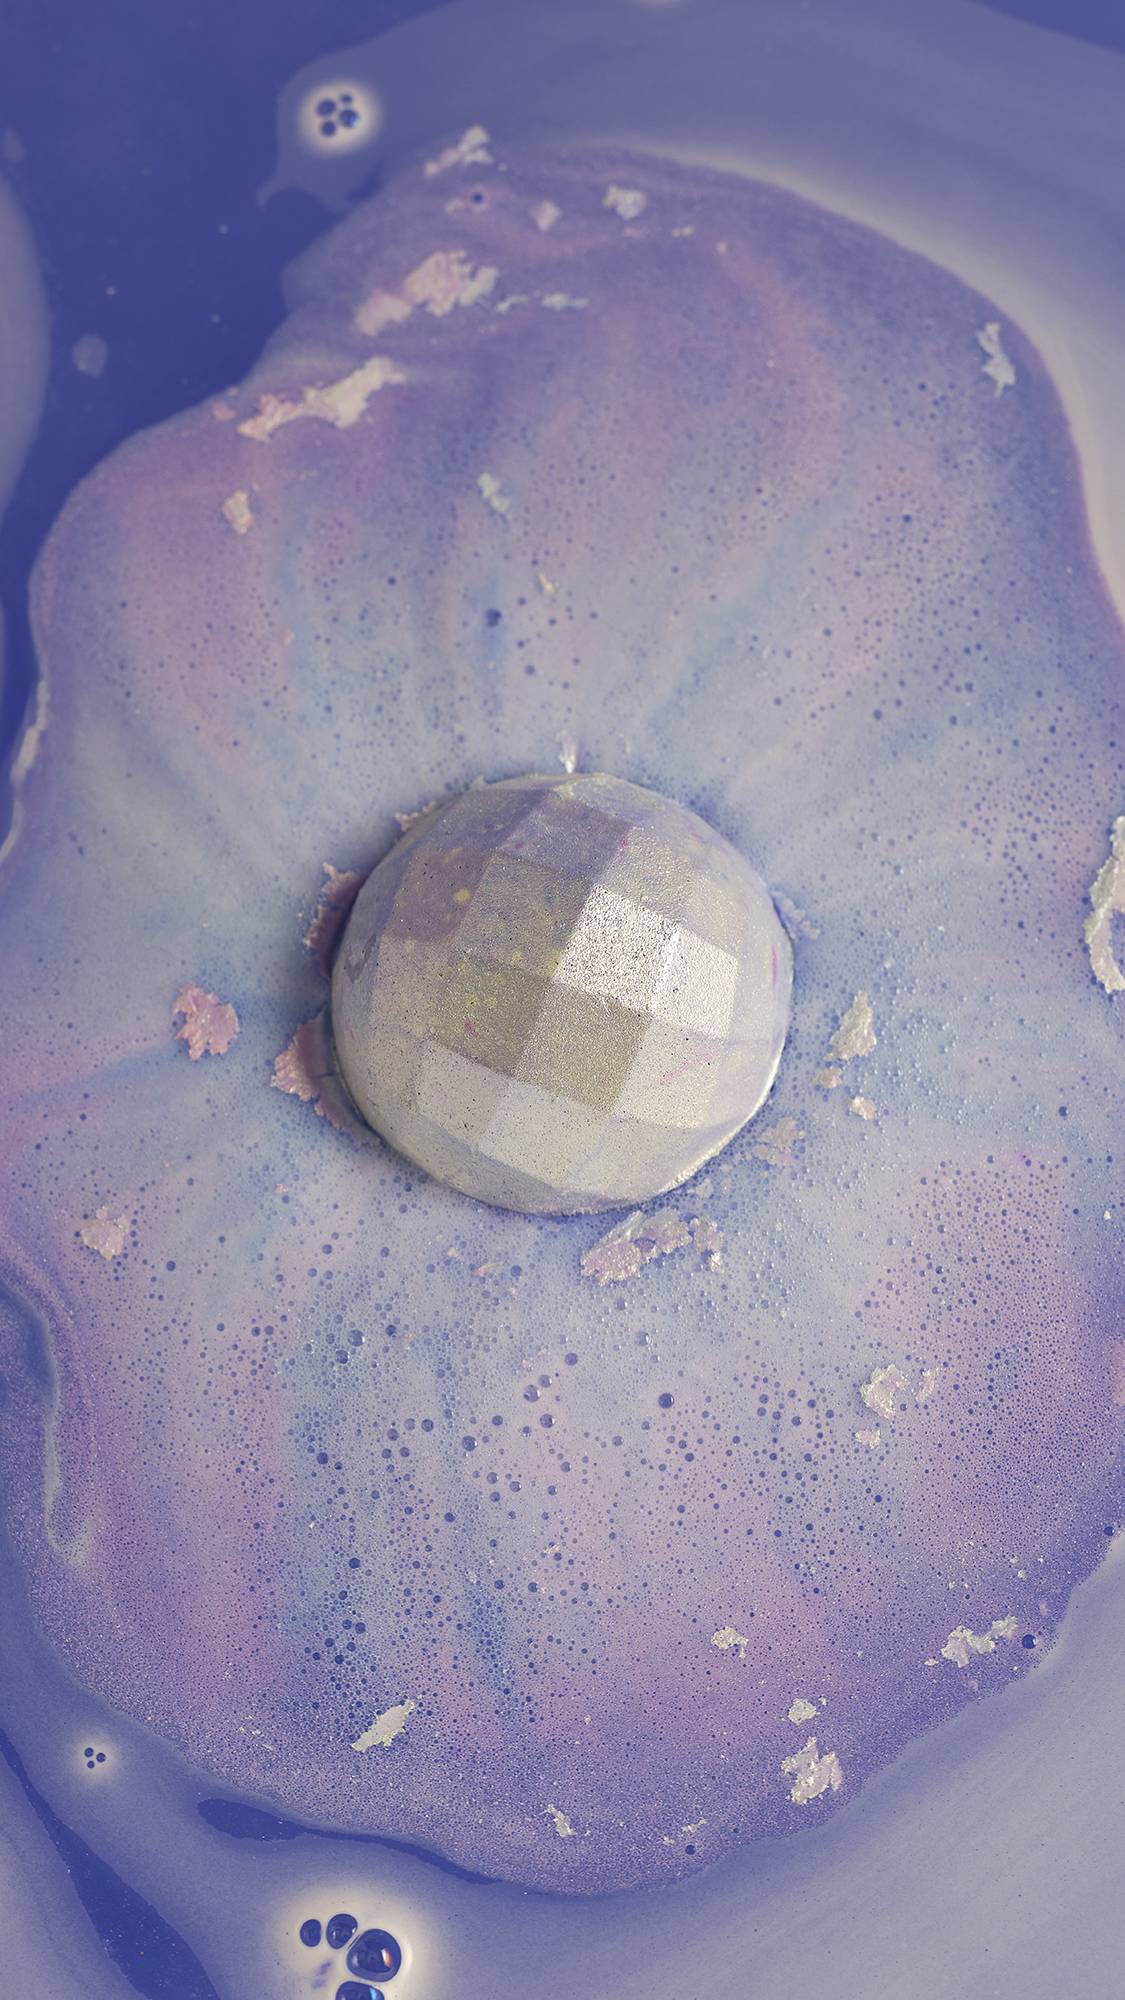 The shimmering bath bomb sits dissolving among a sea of metallic purple, blue and pink foam. 